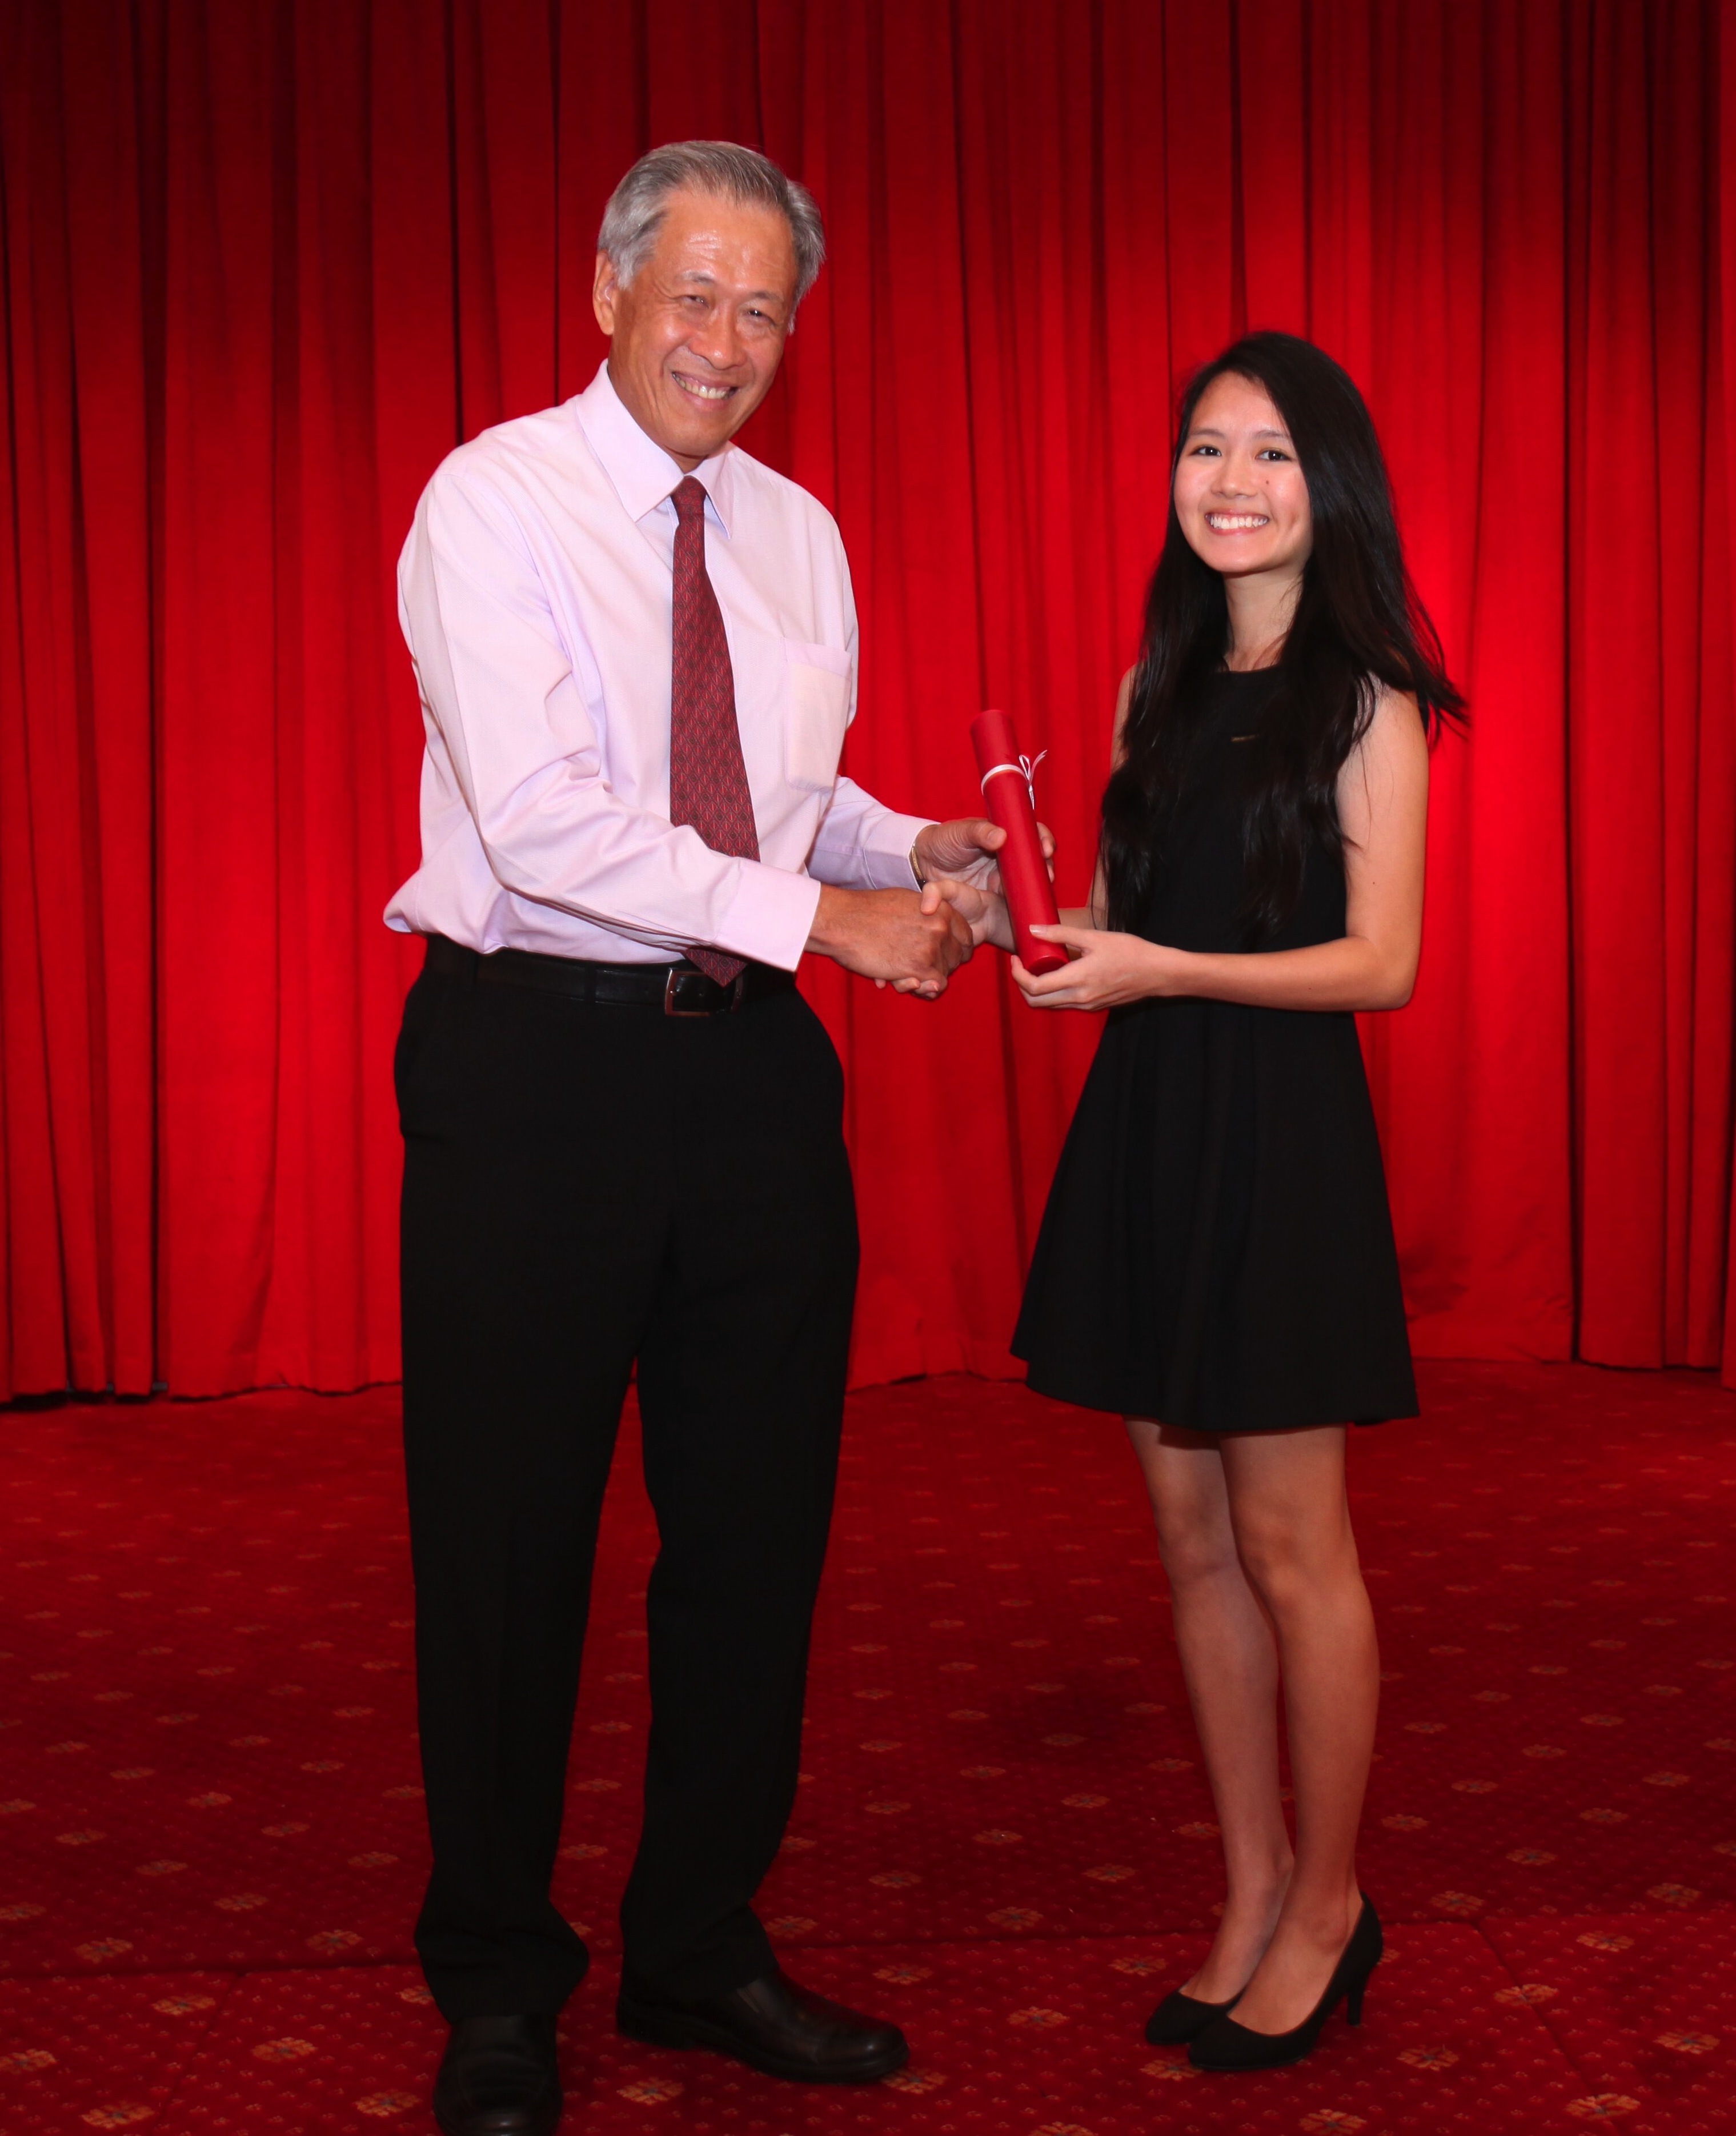 Amanda Foo received the award from Defence Minister Dr Ng Eng Hen